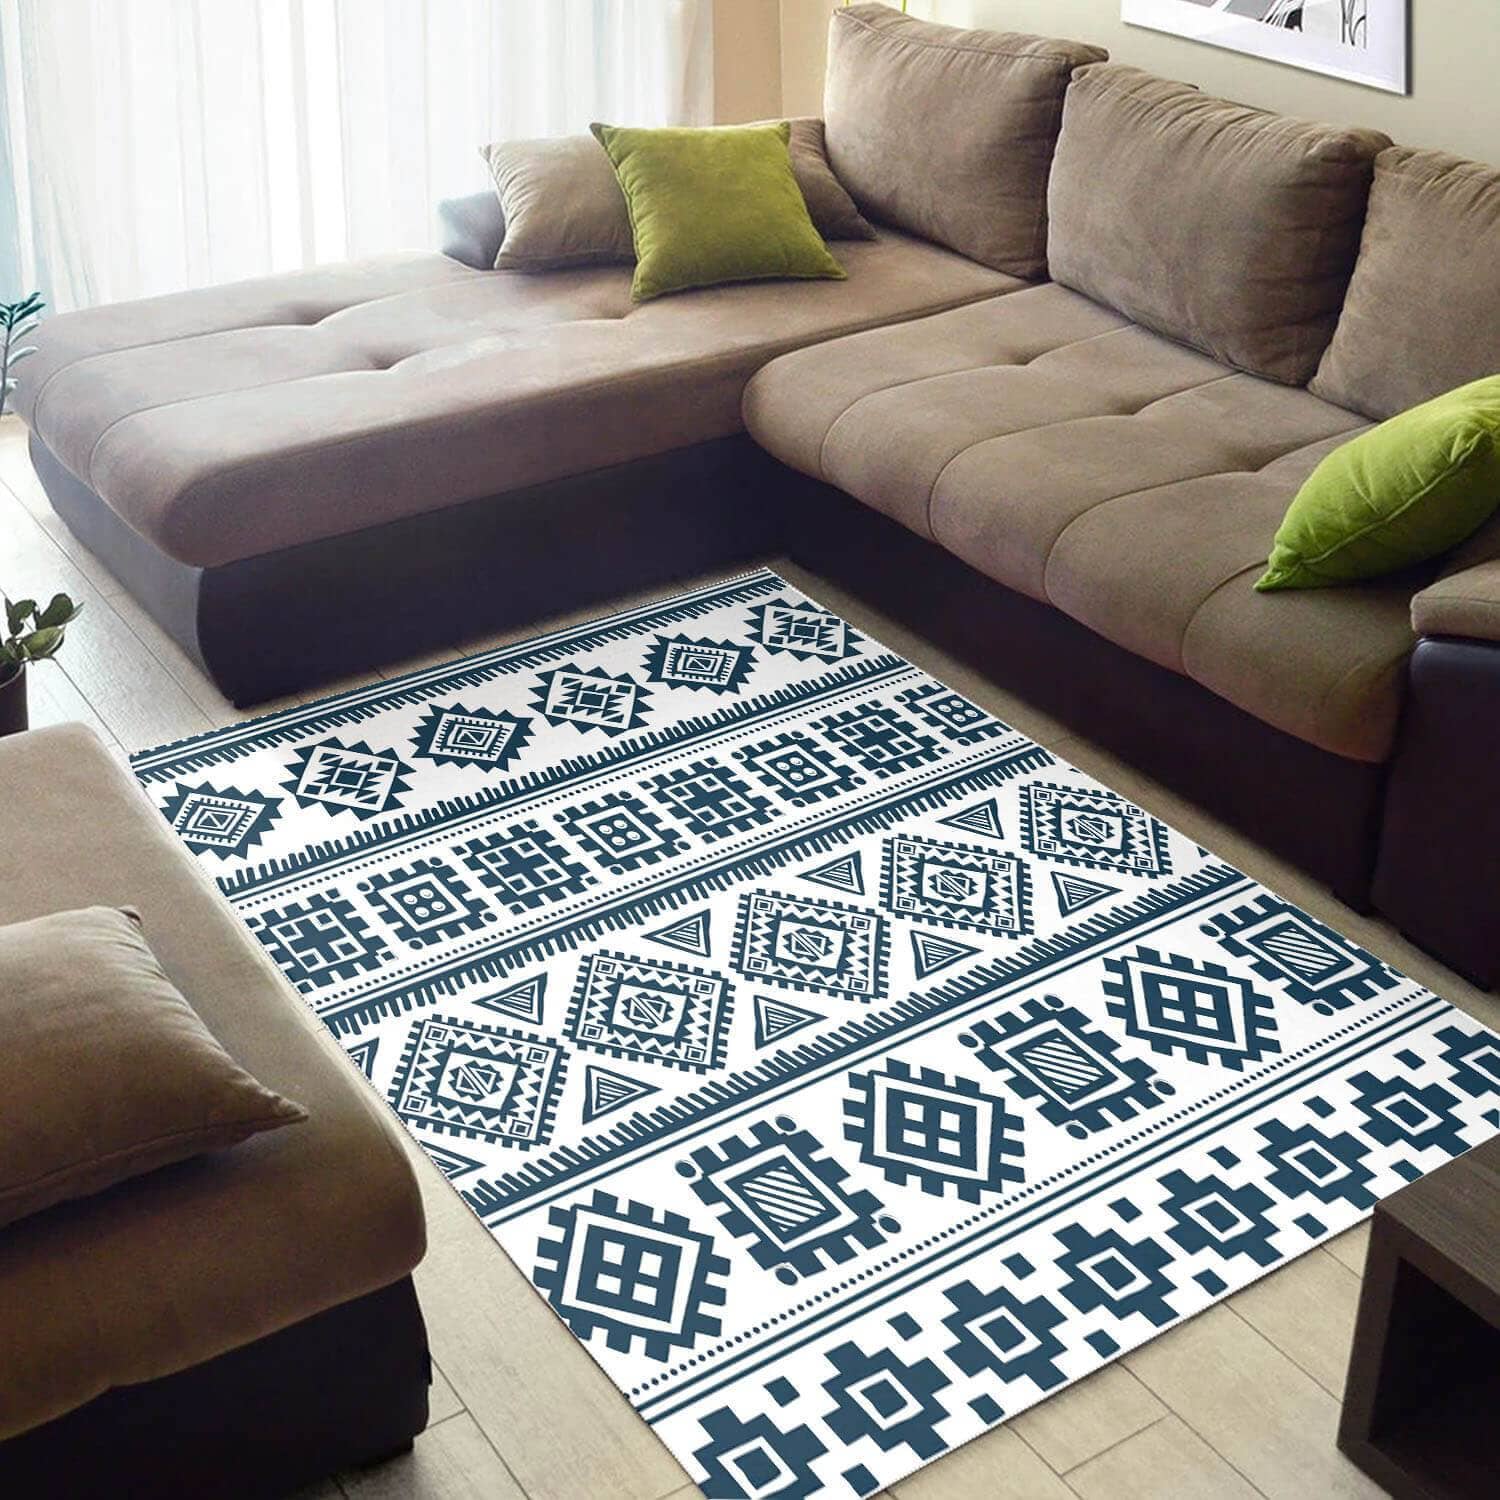 Modern African Abstract Style Afrocentric Art Design Floor Carpet Inspired Living Room Rug